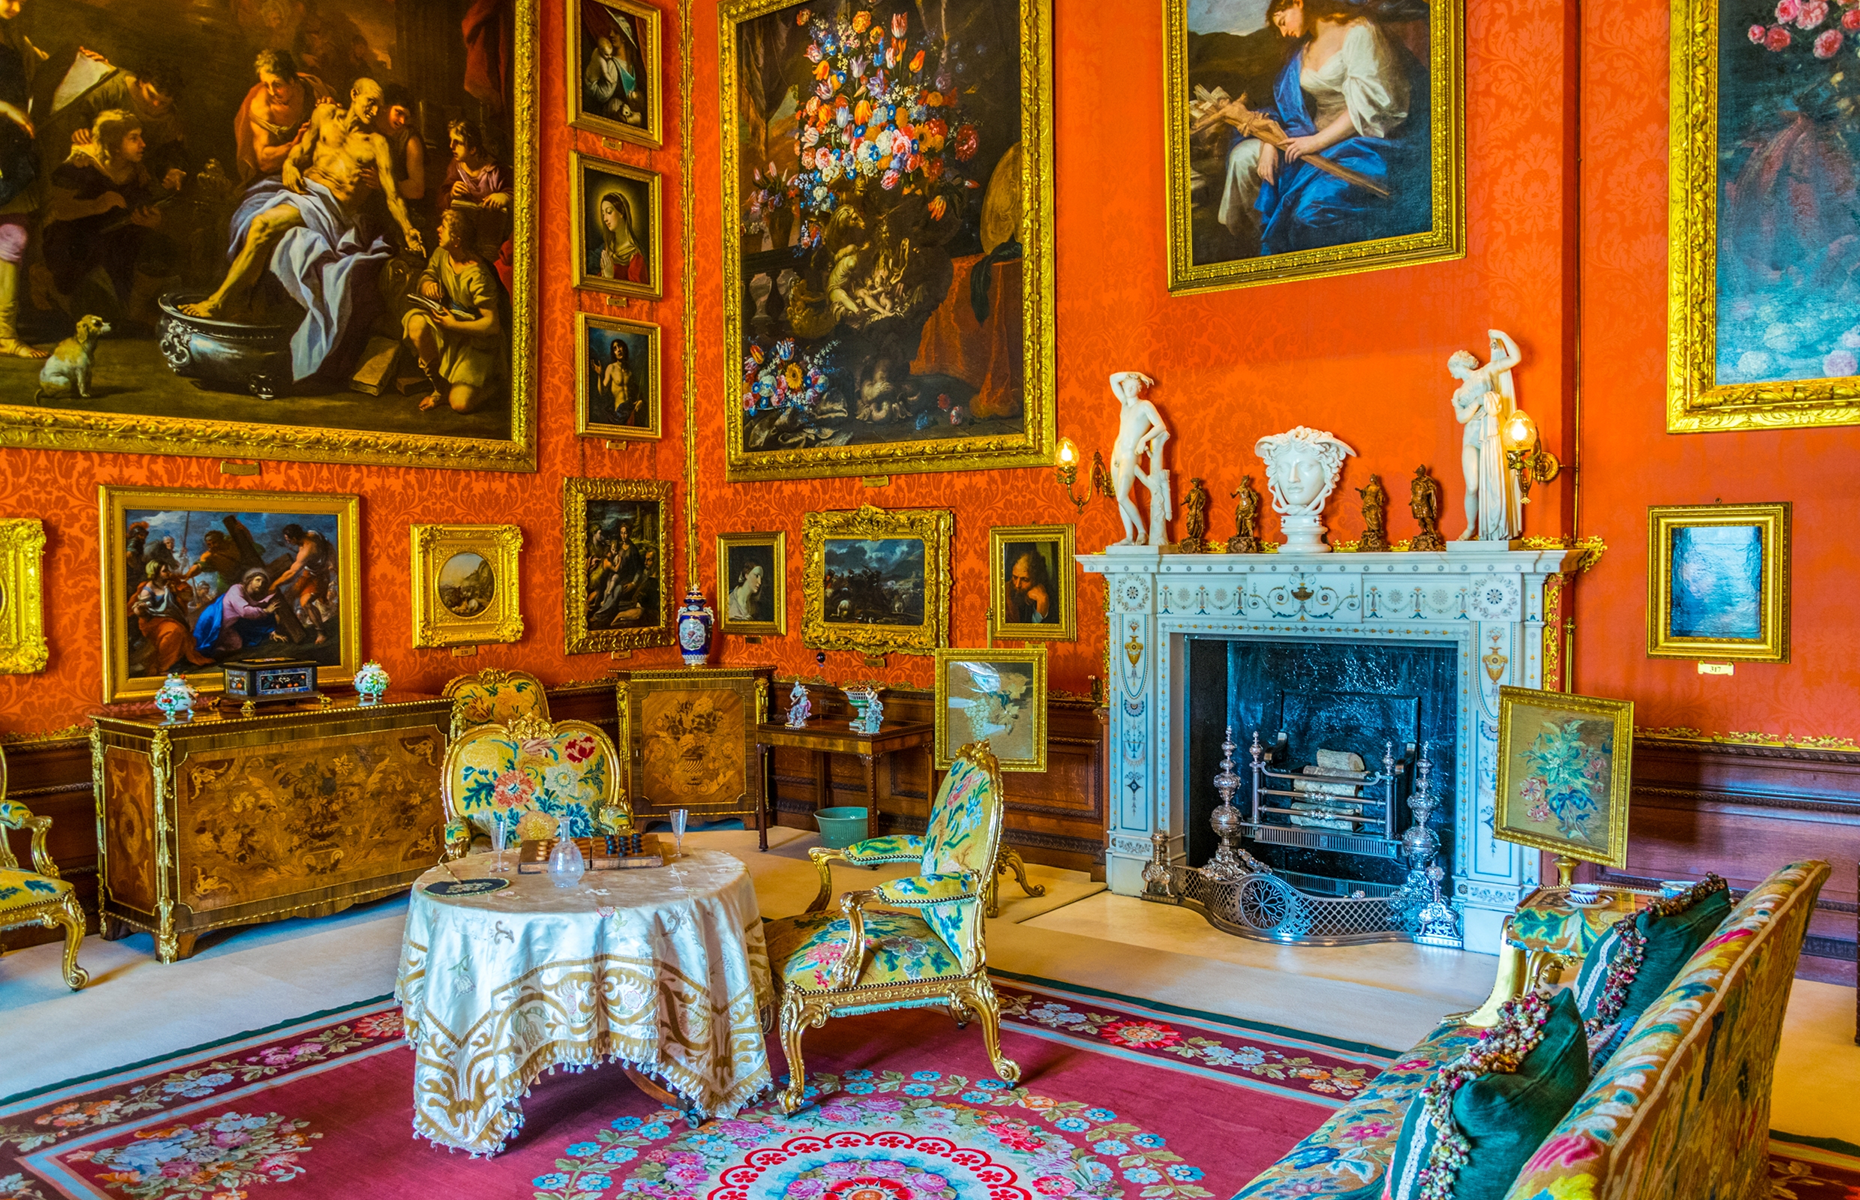 <p>This bold space is down to another of Cecil's descendant's influence. In 1754, the title was inherited by Brownlow, the 9<sup>th</sup> Earl of Exeter, an enthusiastic collector and patron of the arts. It was under Brownlow that the 35 state rooms, known as <a href="https://burghley.co.uk/about-us/the-family/history-of-the-family">the George Rooms</a>, were finally finished after nearly 50 years of remaining untouched.</p>  <p>The rooms were mostly redecorated in a traditional Baroque style, becoming galleries for the palace’s spectacular art collection, curated over four centuries’ worth of acquisition.</p>